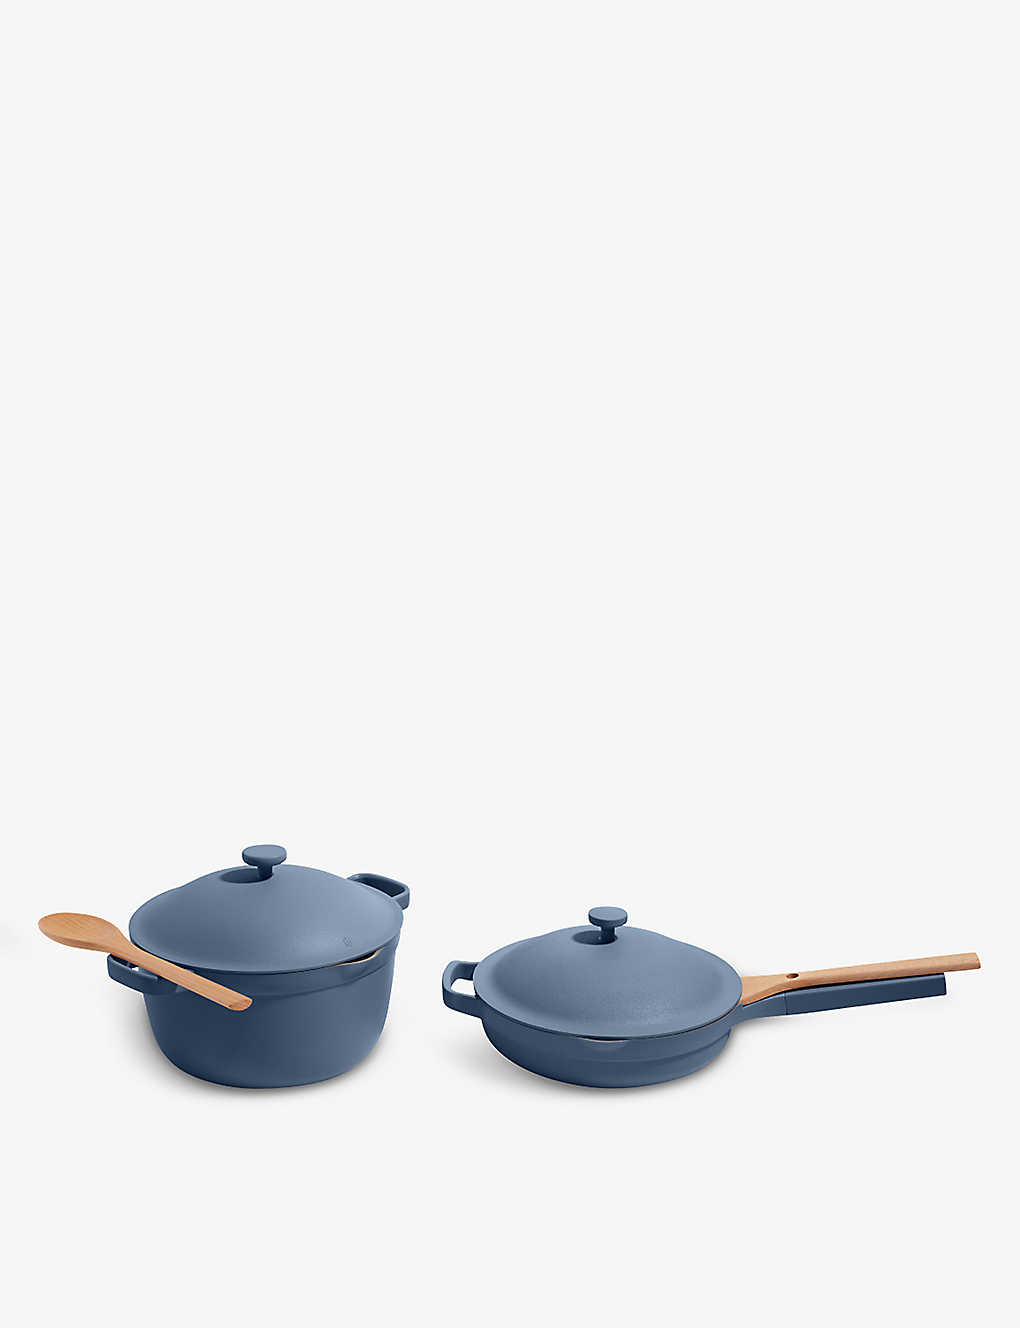 Our Place Blue Salt Home Cook Duo Ceramic Pot And Pan Two-piece Set Worth £270